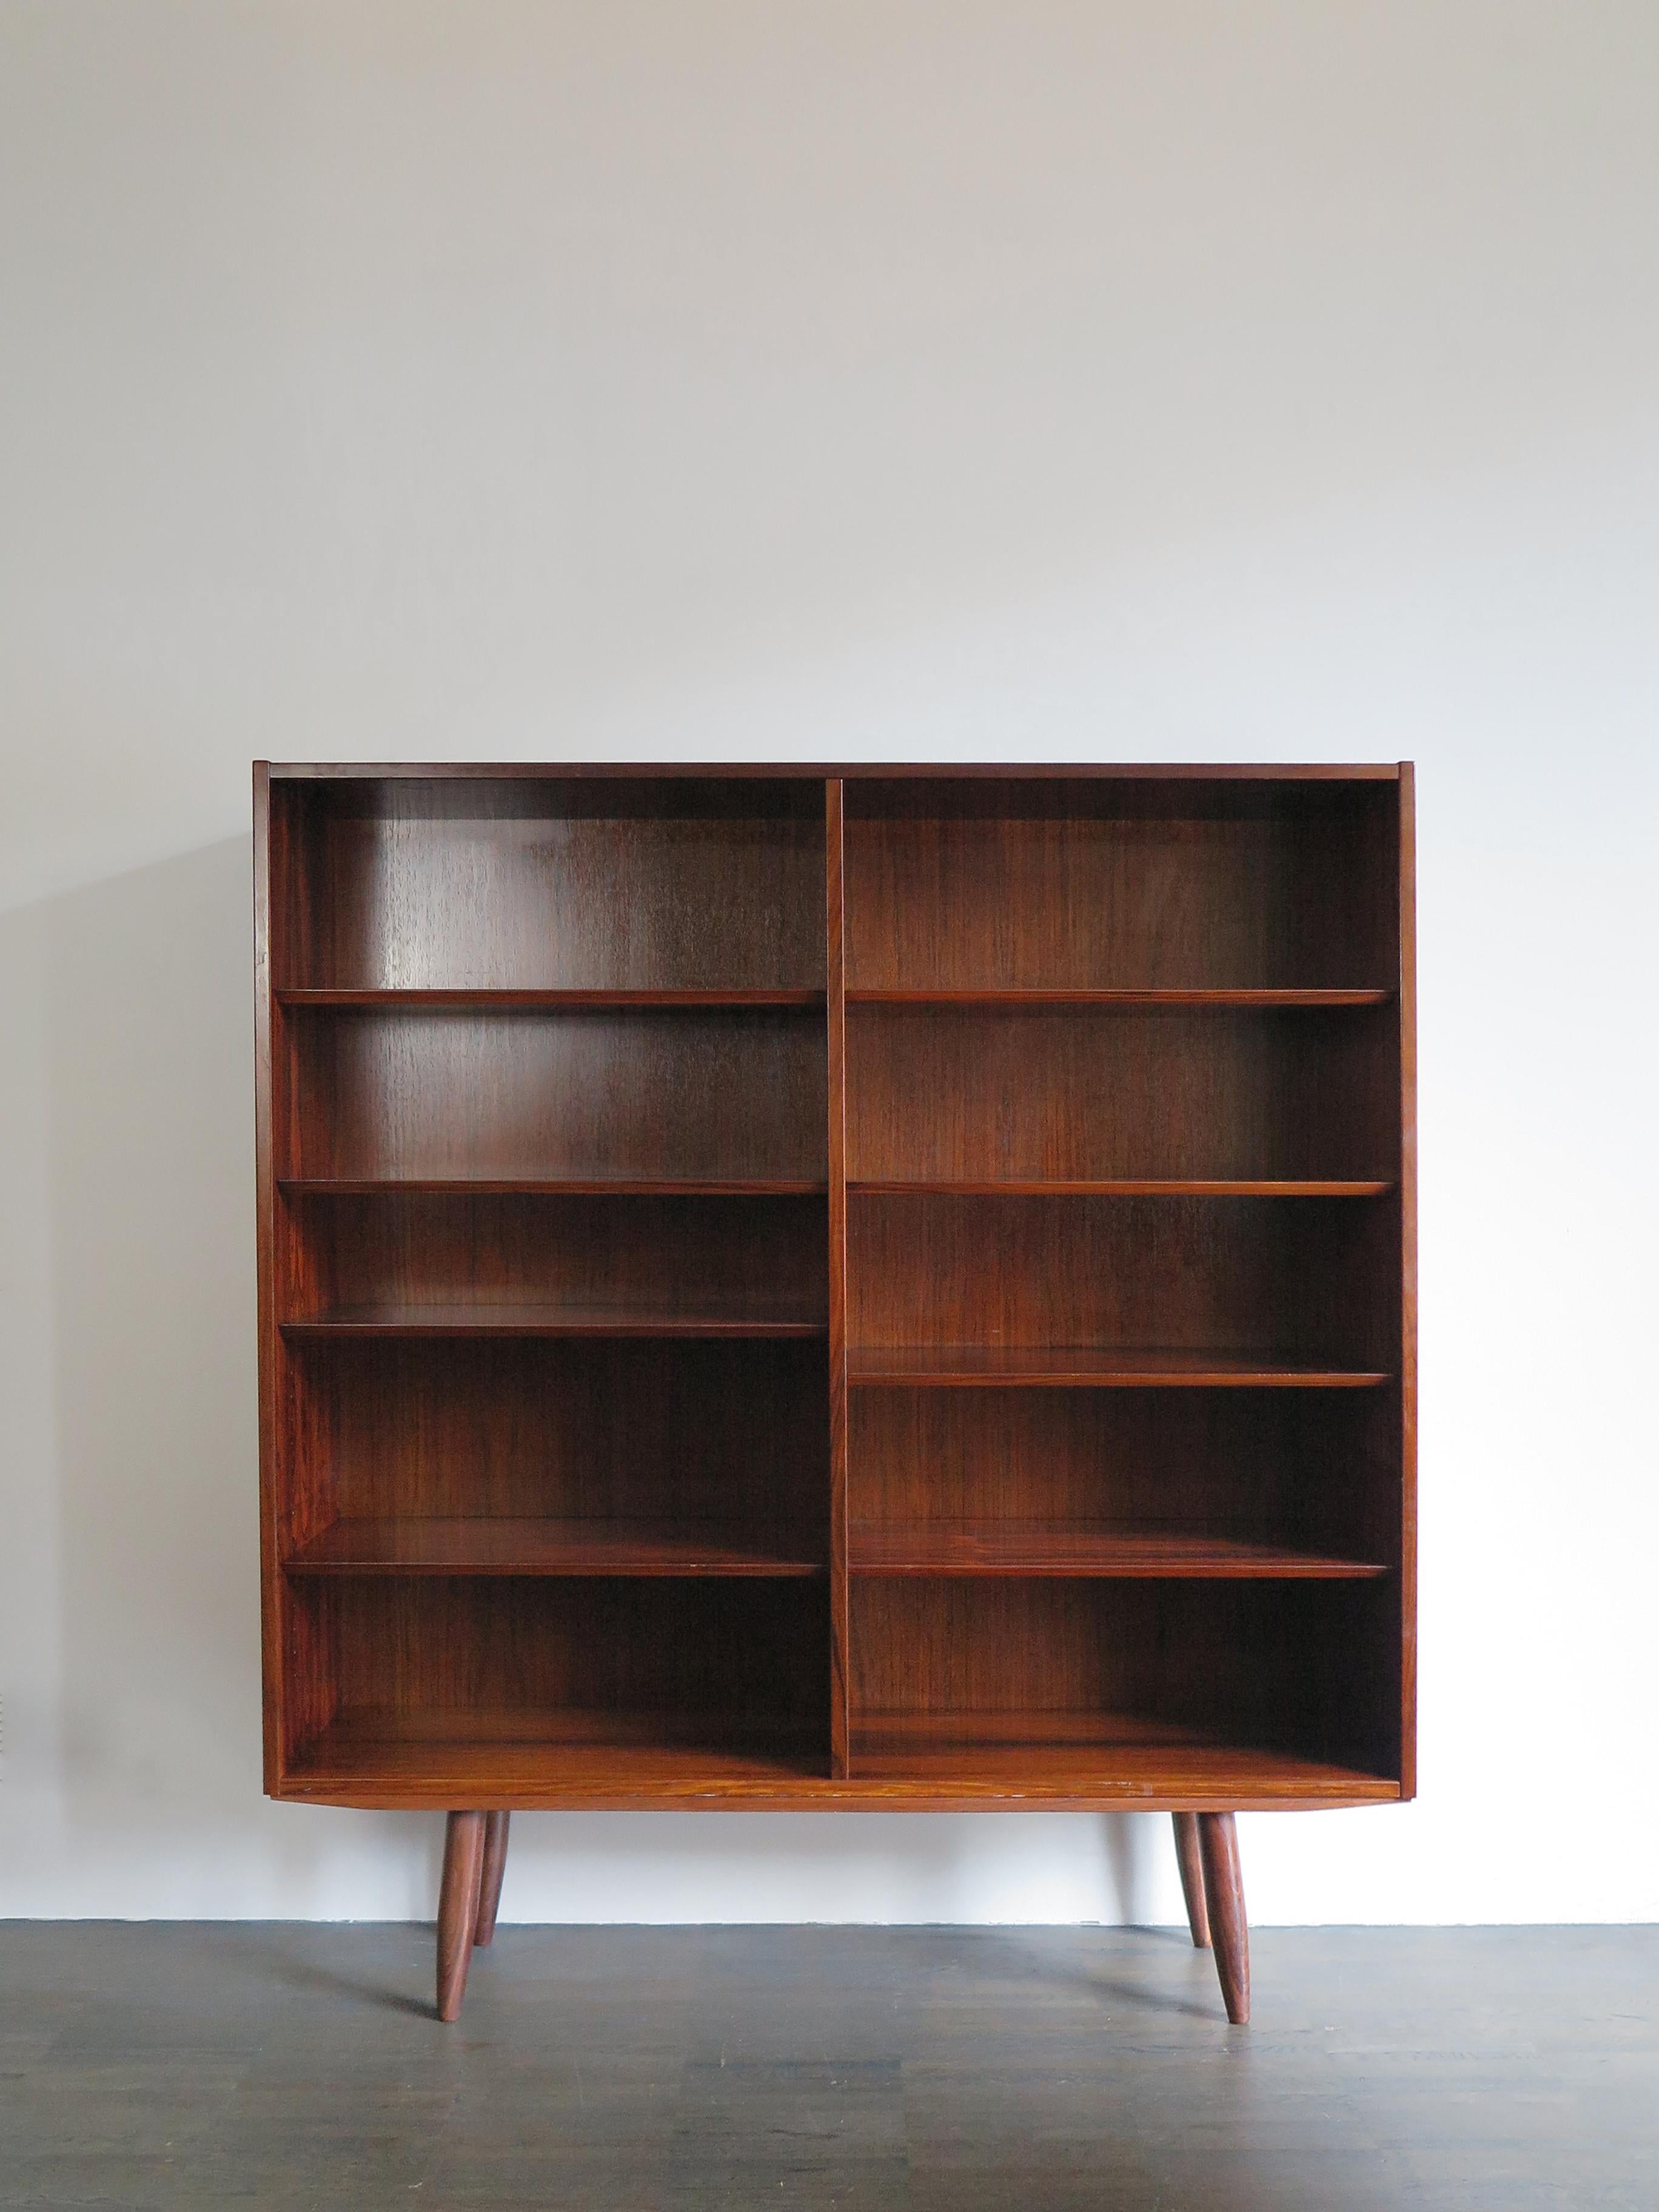 Scandinavian Mid-Century Modern design dark wood bookcase designed by Gunni Omann and produced by Omann Jun Møbelfabrik in the 1960s, variable height position of shelves, Denmark 1960s.

Please note that the bookcase is original of the period and